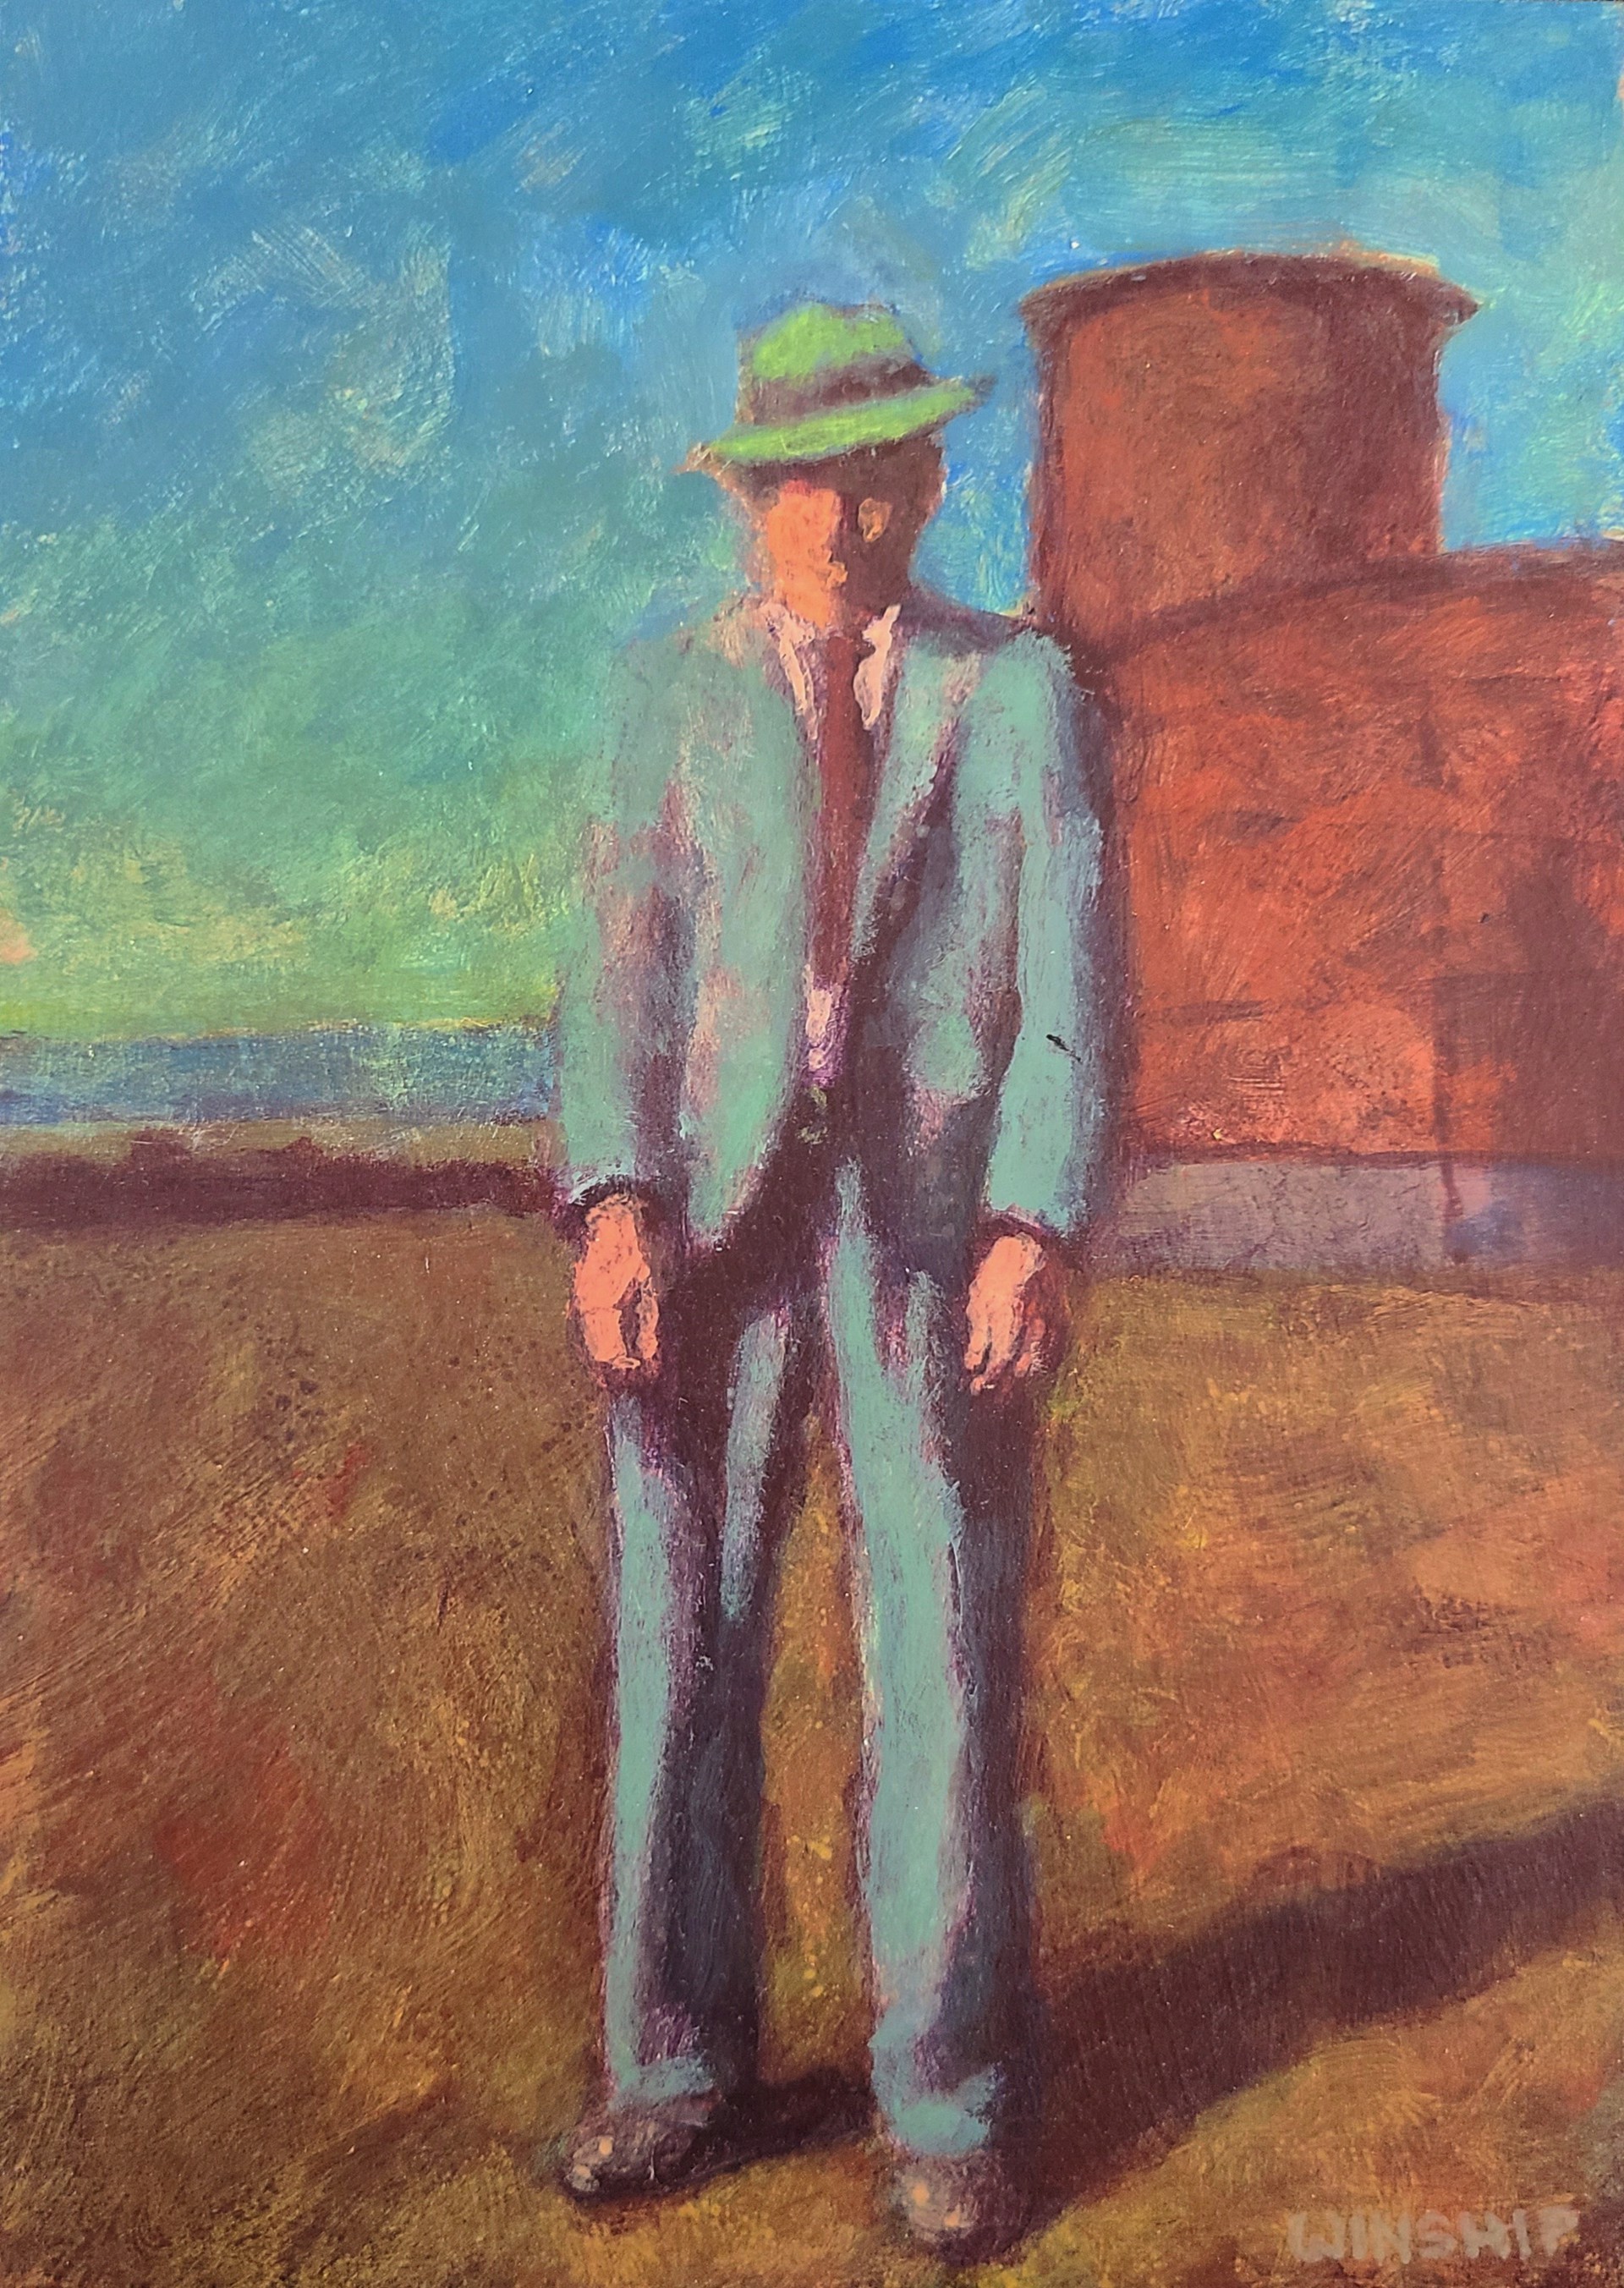 MAN IN FRONT OF A SILO by JOHN WINSHIP